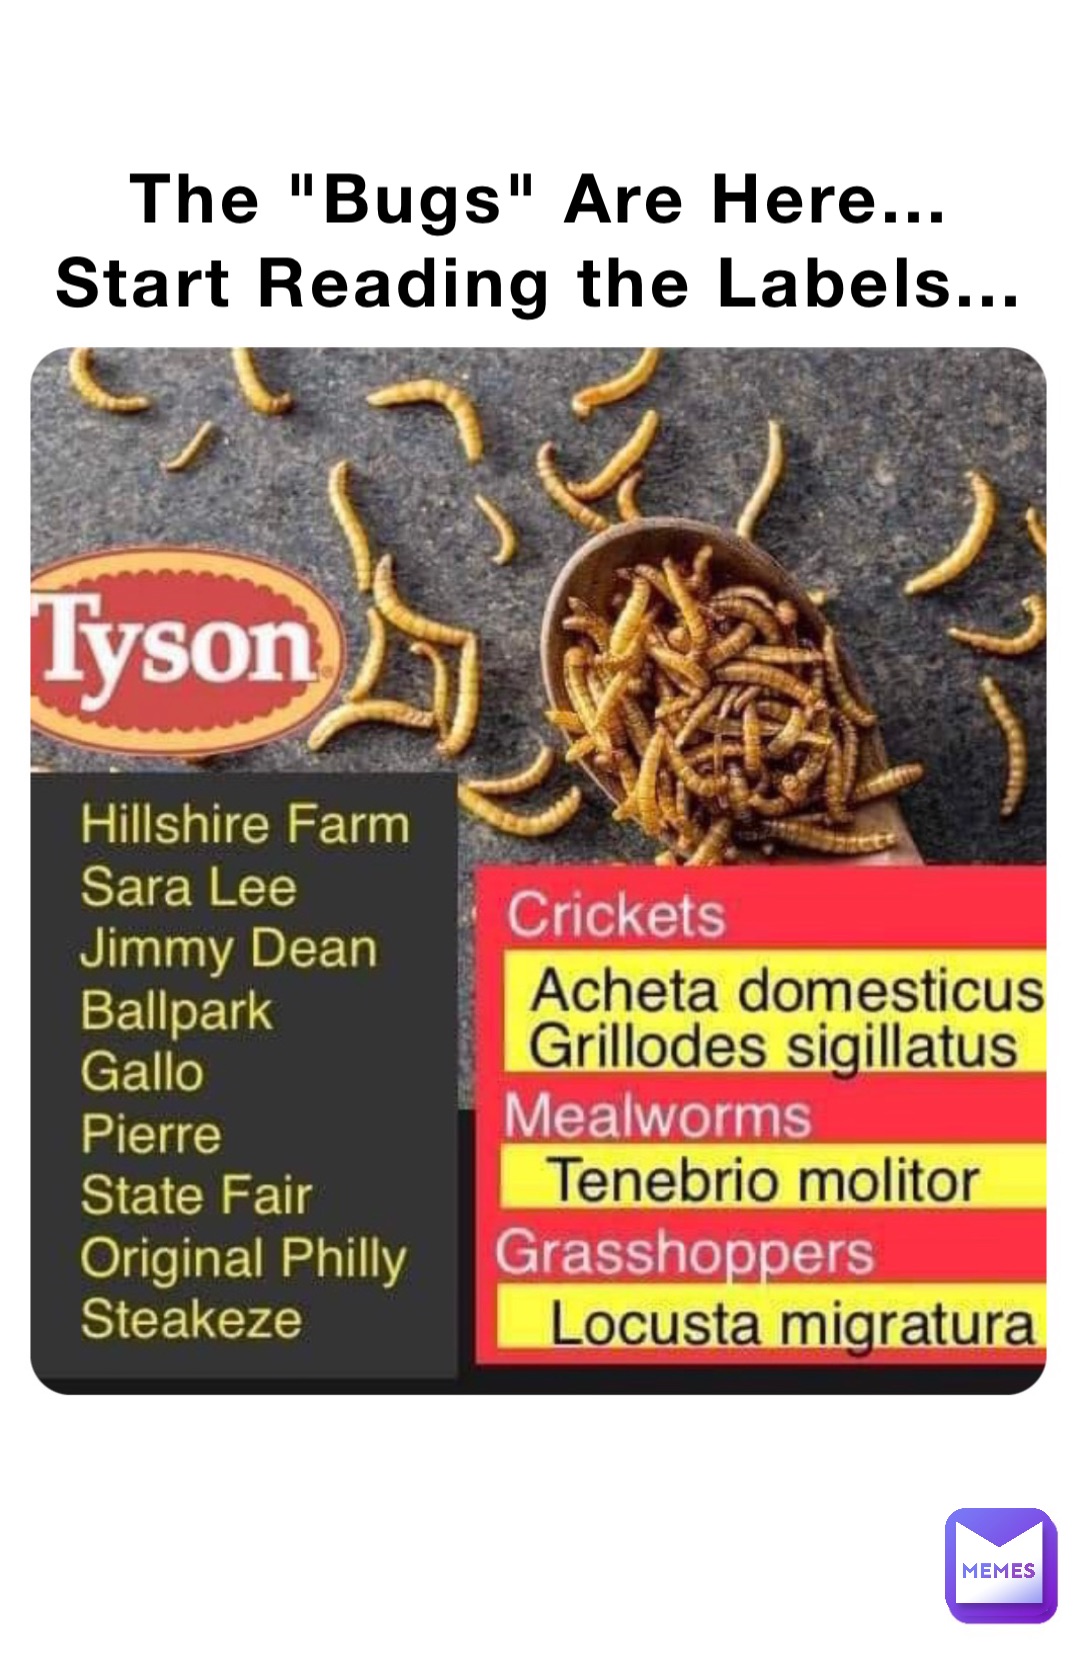 The "Bugs" Are Here...
Start Reading the Labels... Double tap to edit